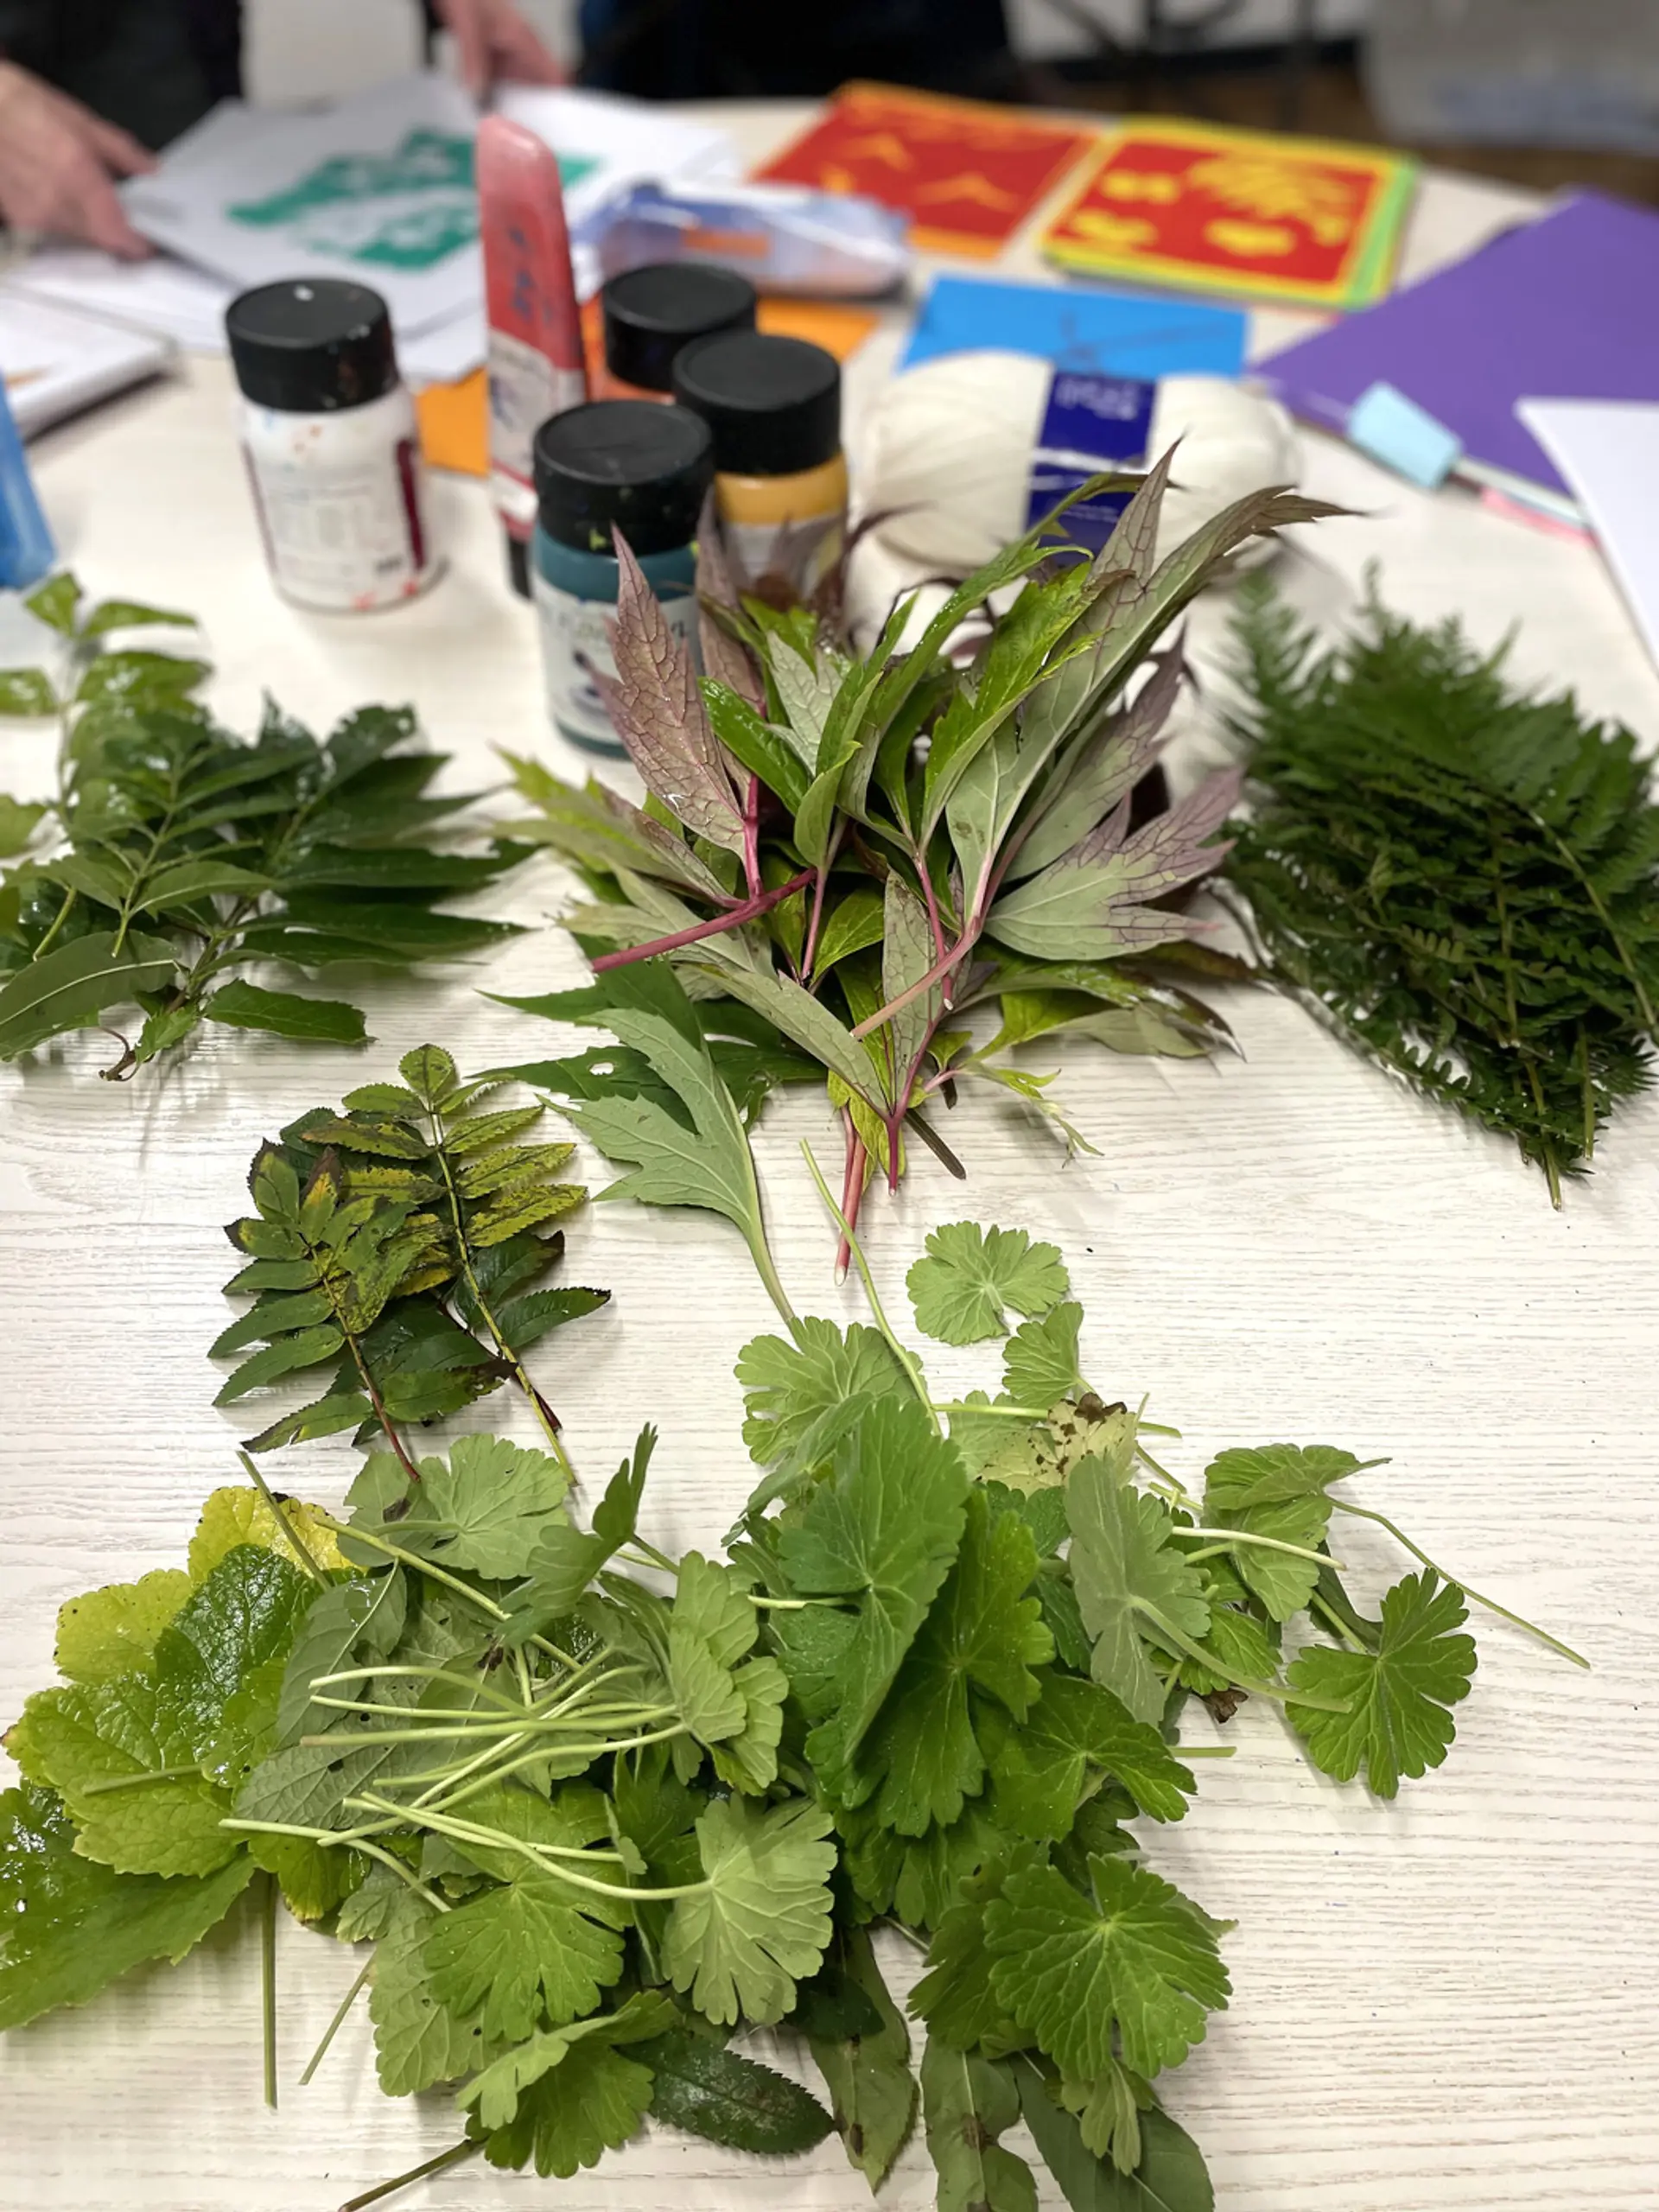 A variety of different green leaves are arranged in bunches on a tabletop in an art class. Tubs of paints and coloured paper can be seen in the background.